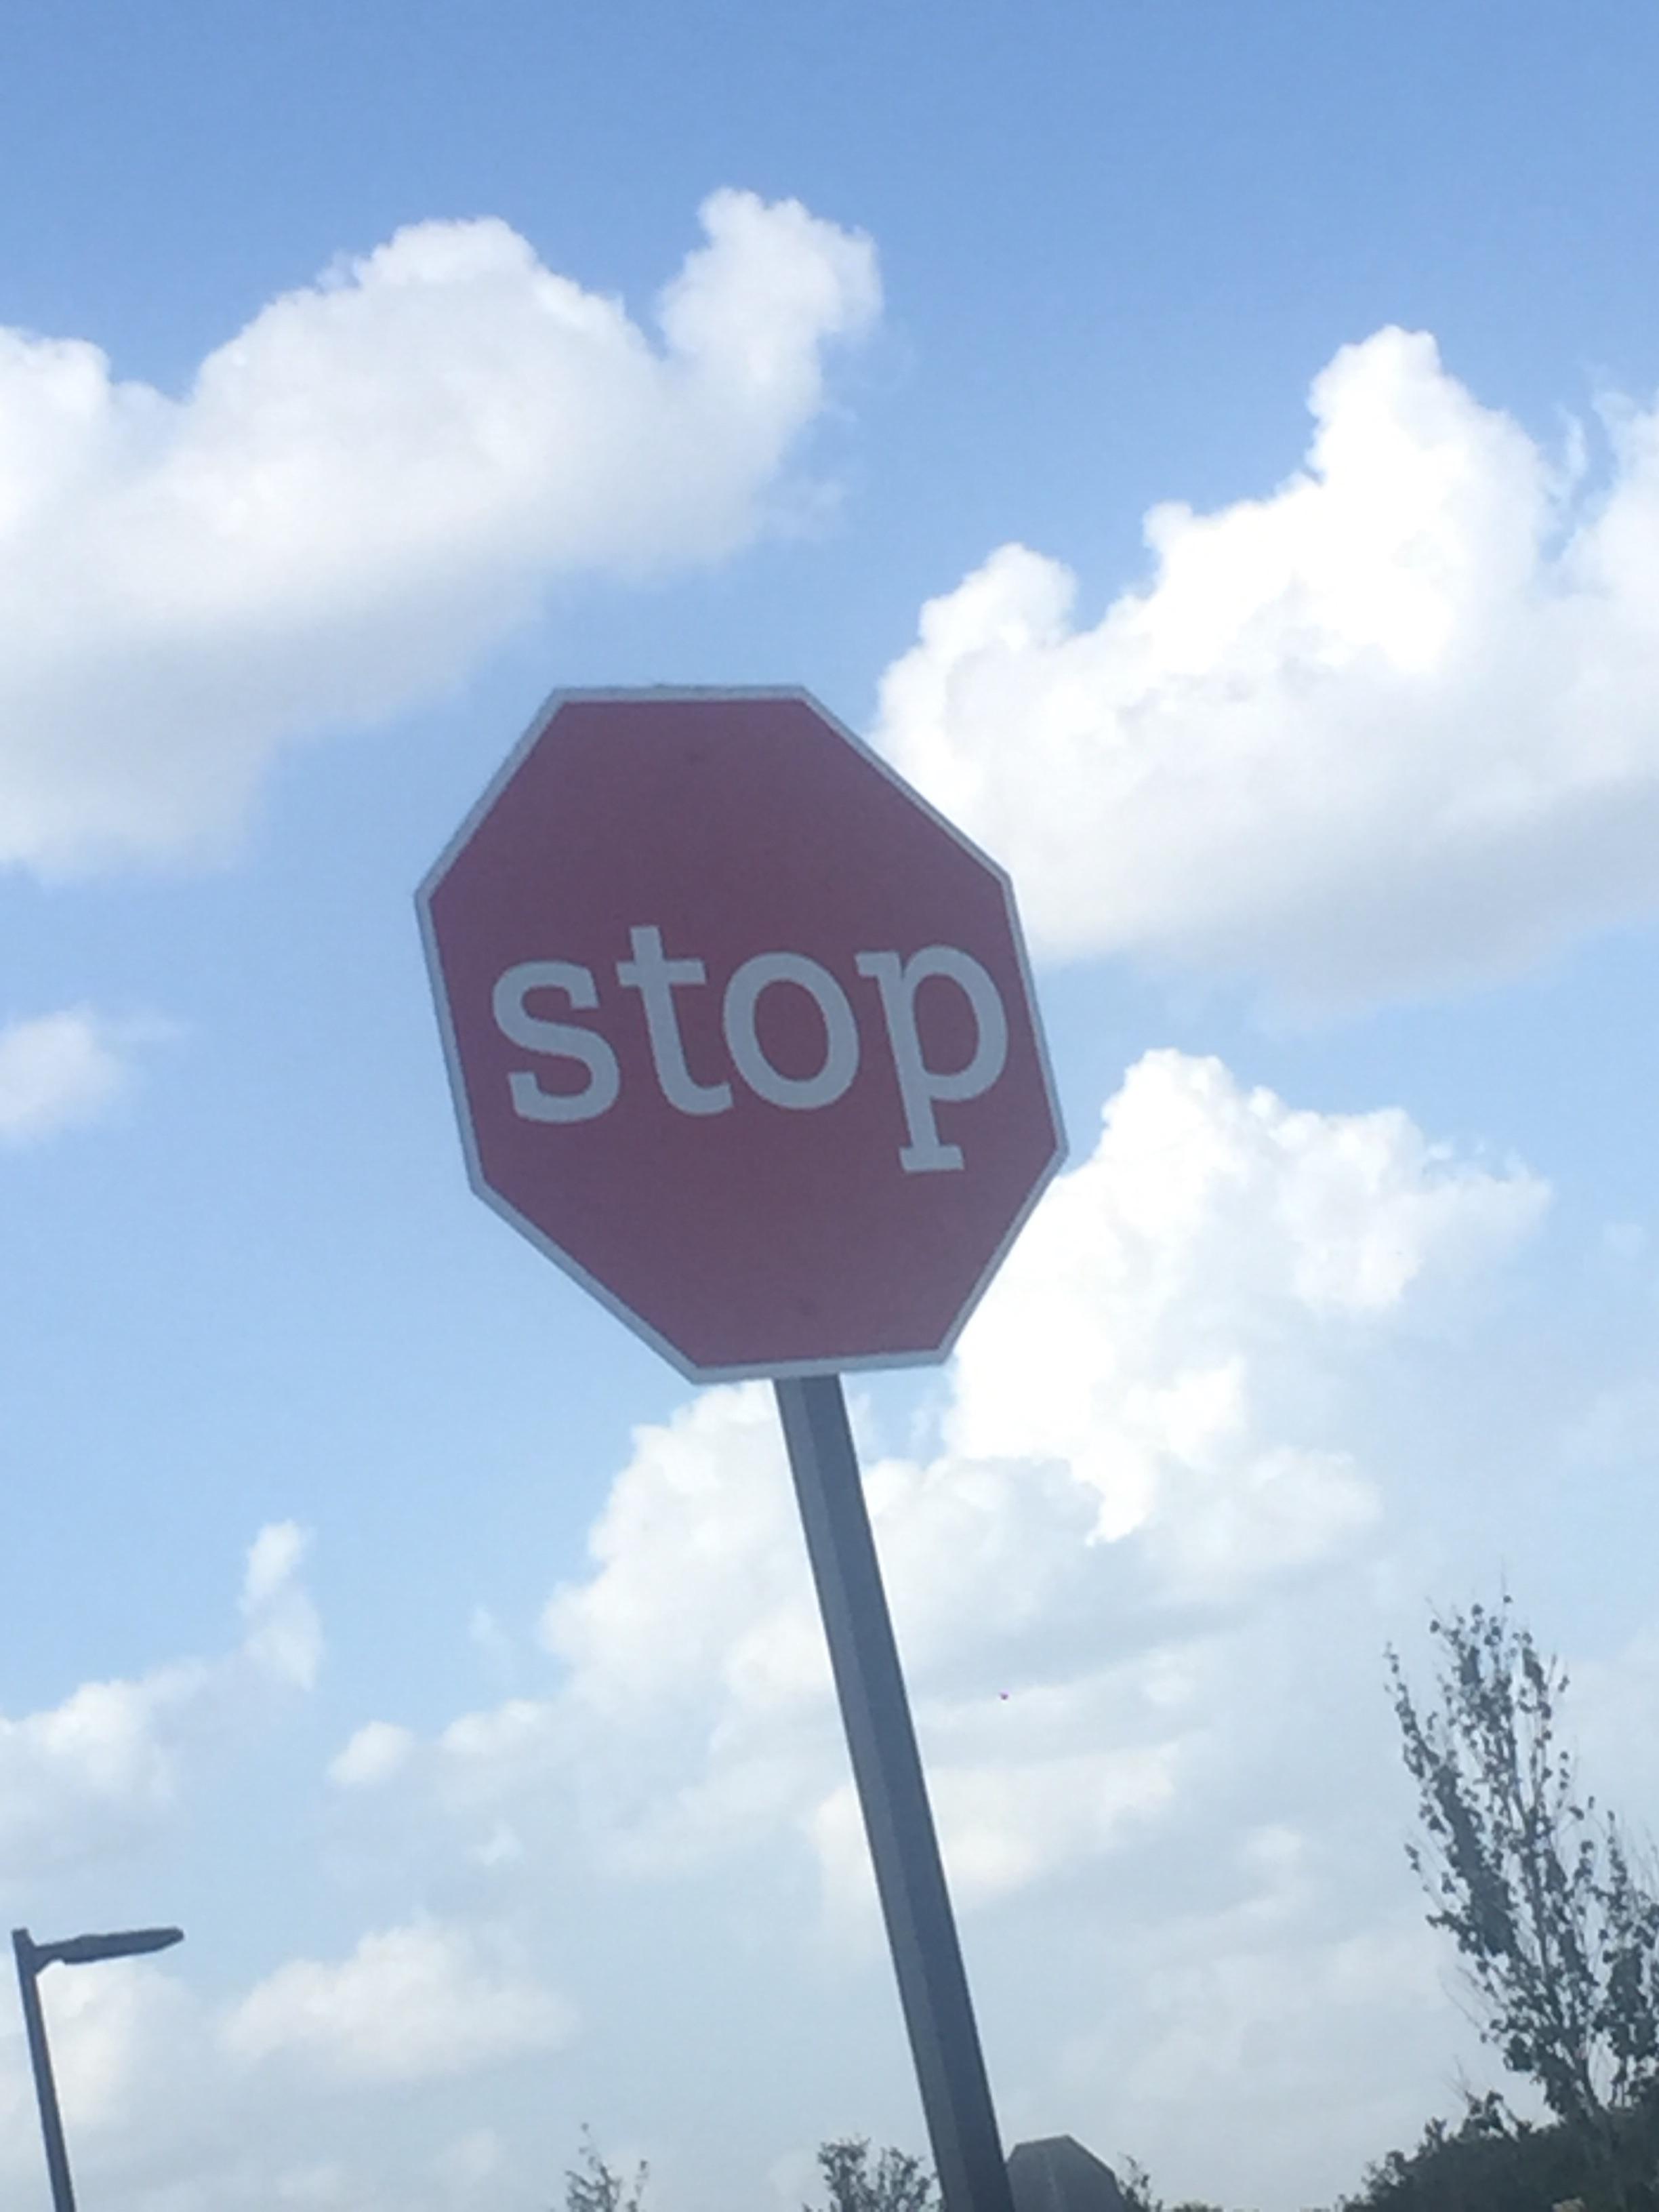 This weird lower-case stop sign : mildlyinteresting